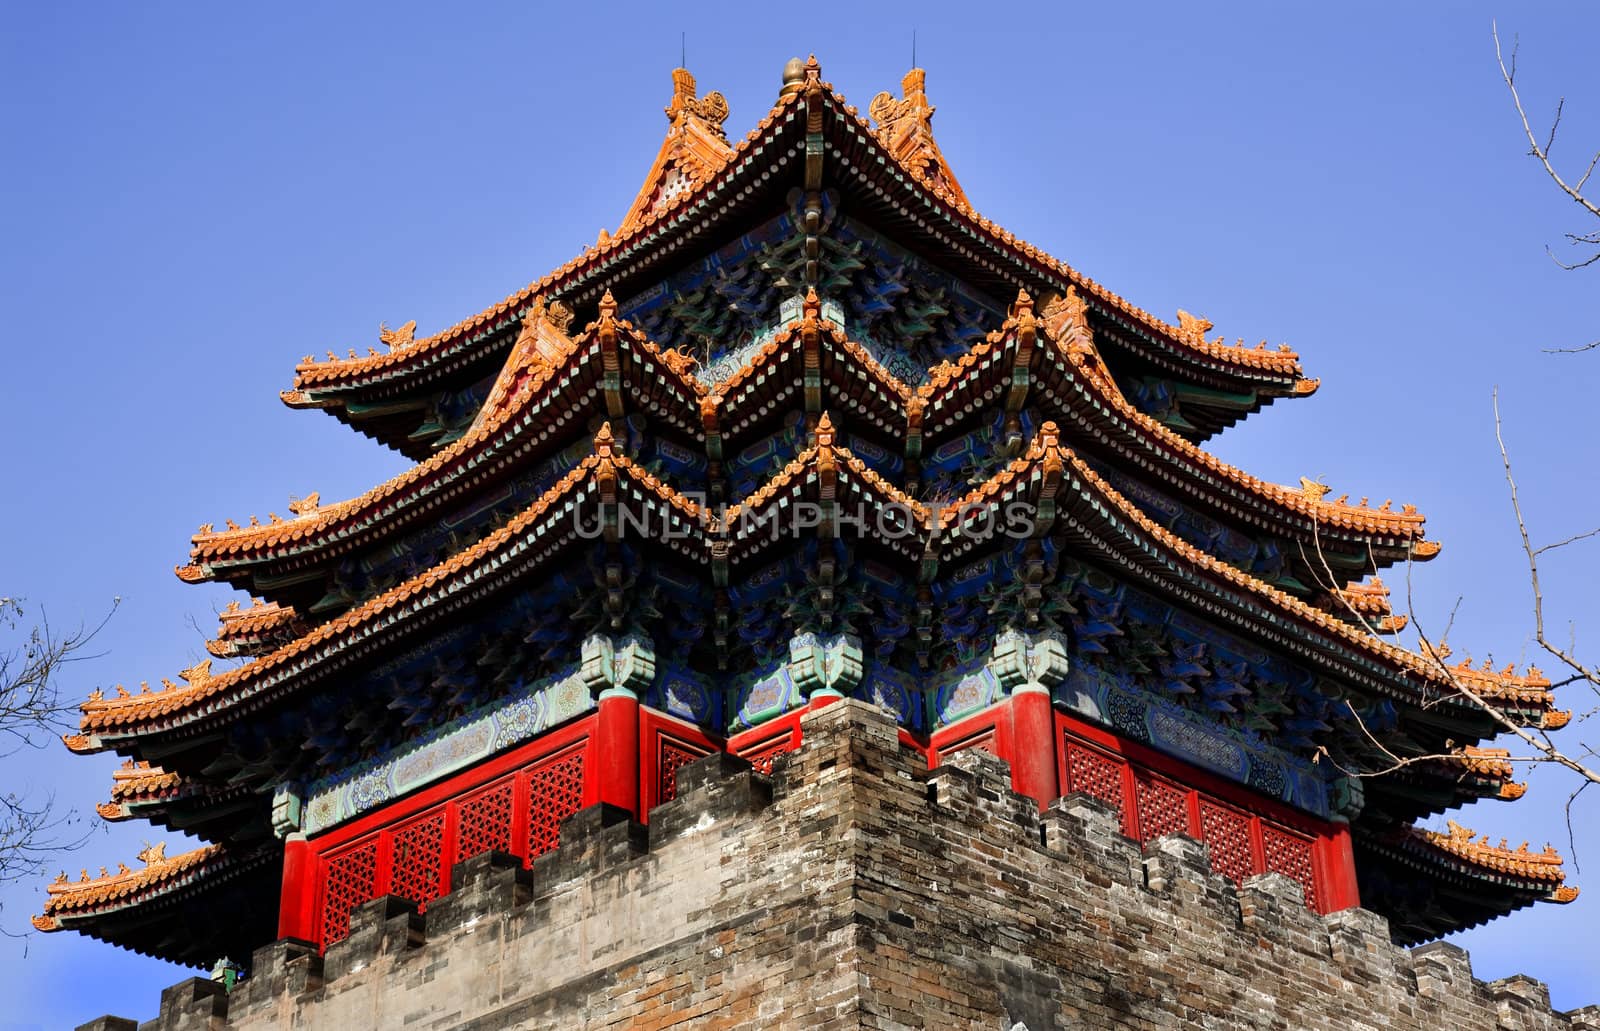 Gugong, Forbidden City Watch Tower Roof Figures Decorations Emperor's Palace Built in the 1600s in the Ming Dynasty

